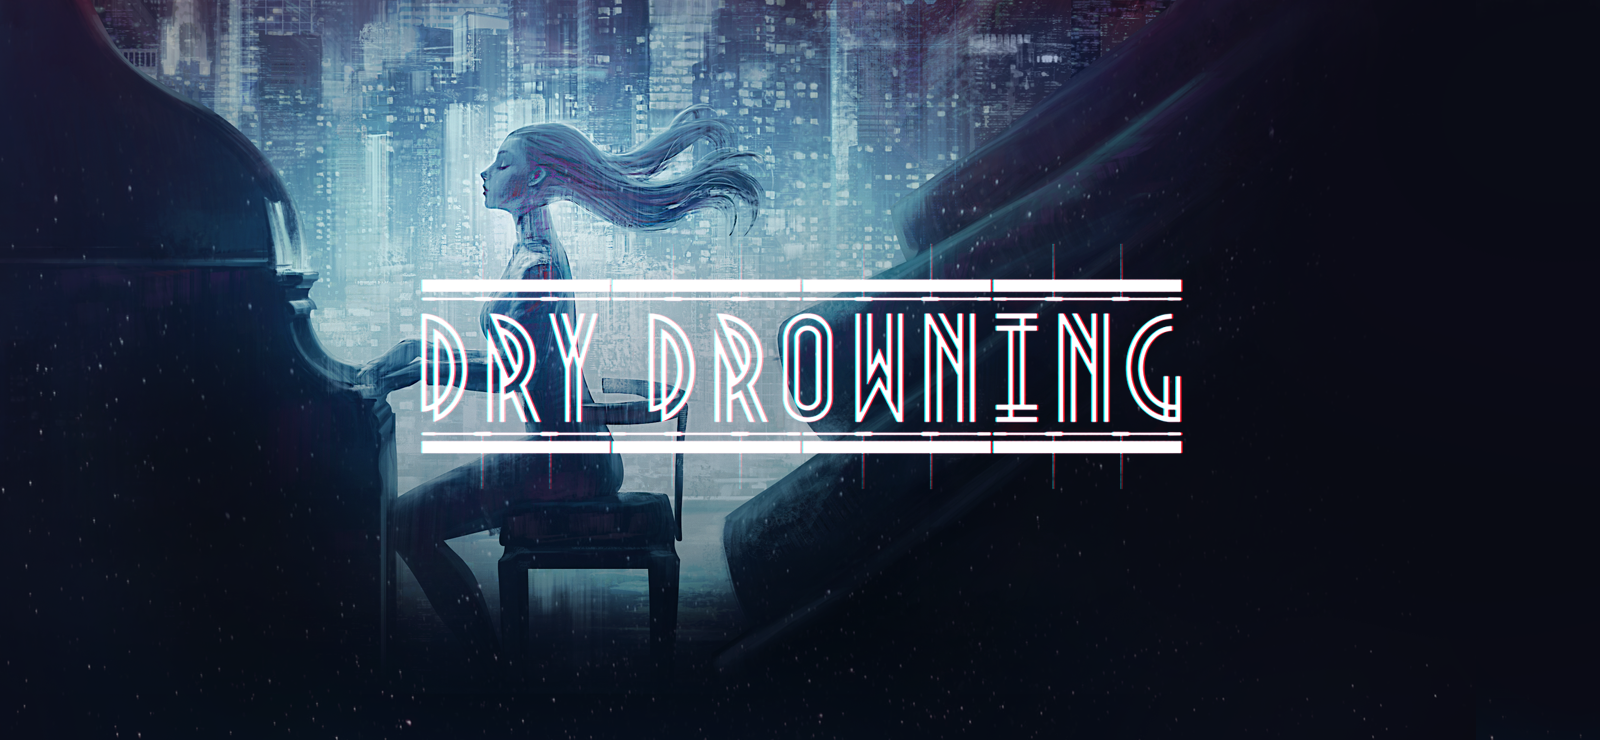 Dry Drowning